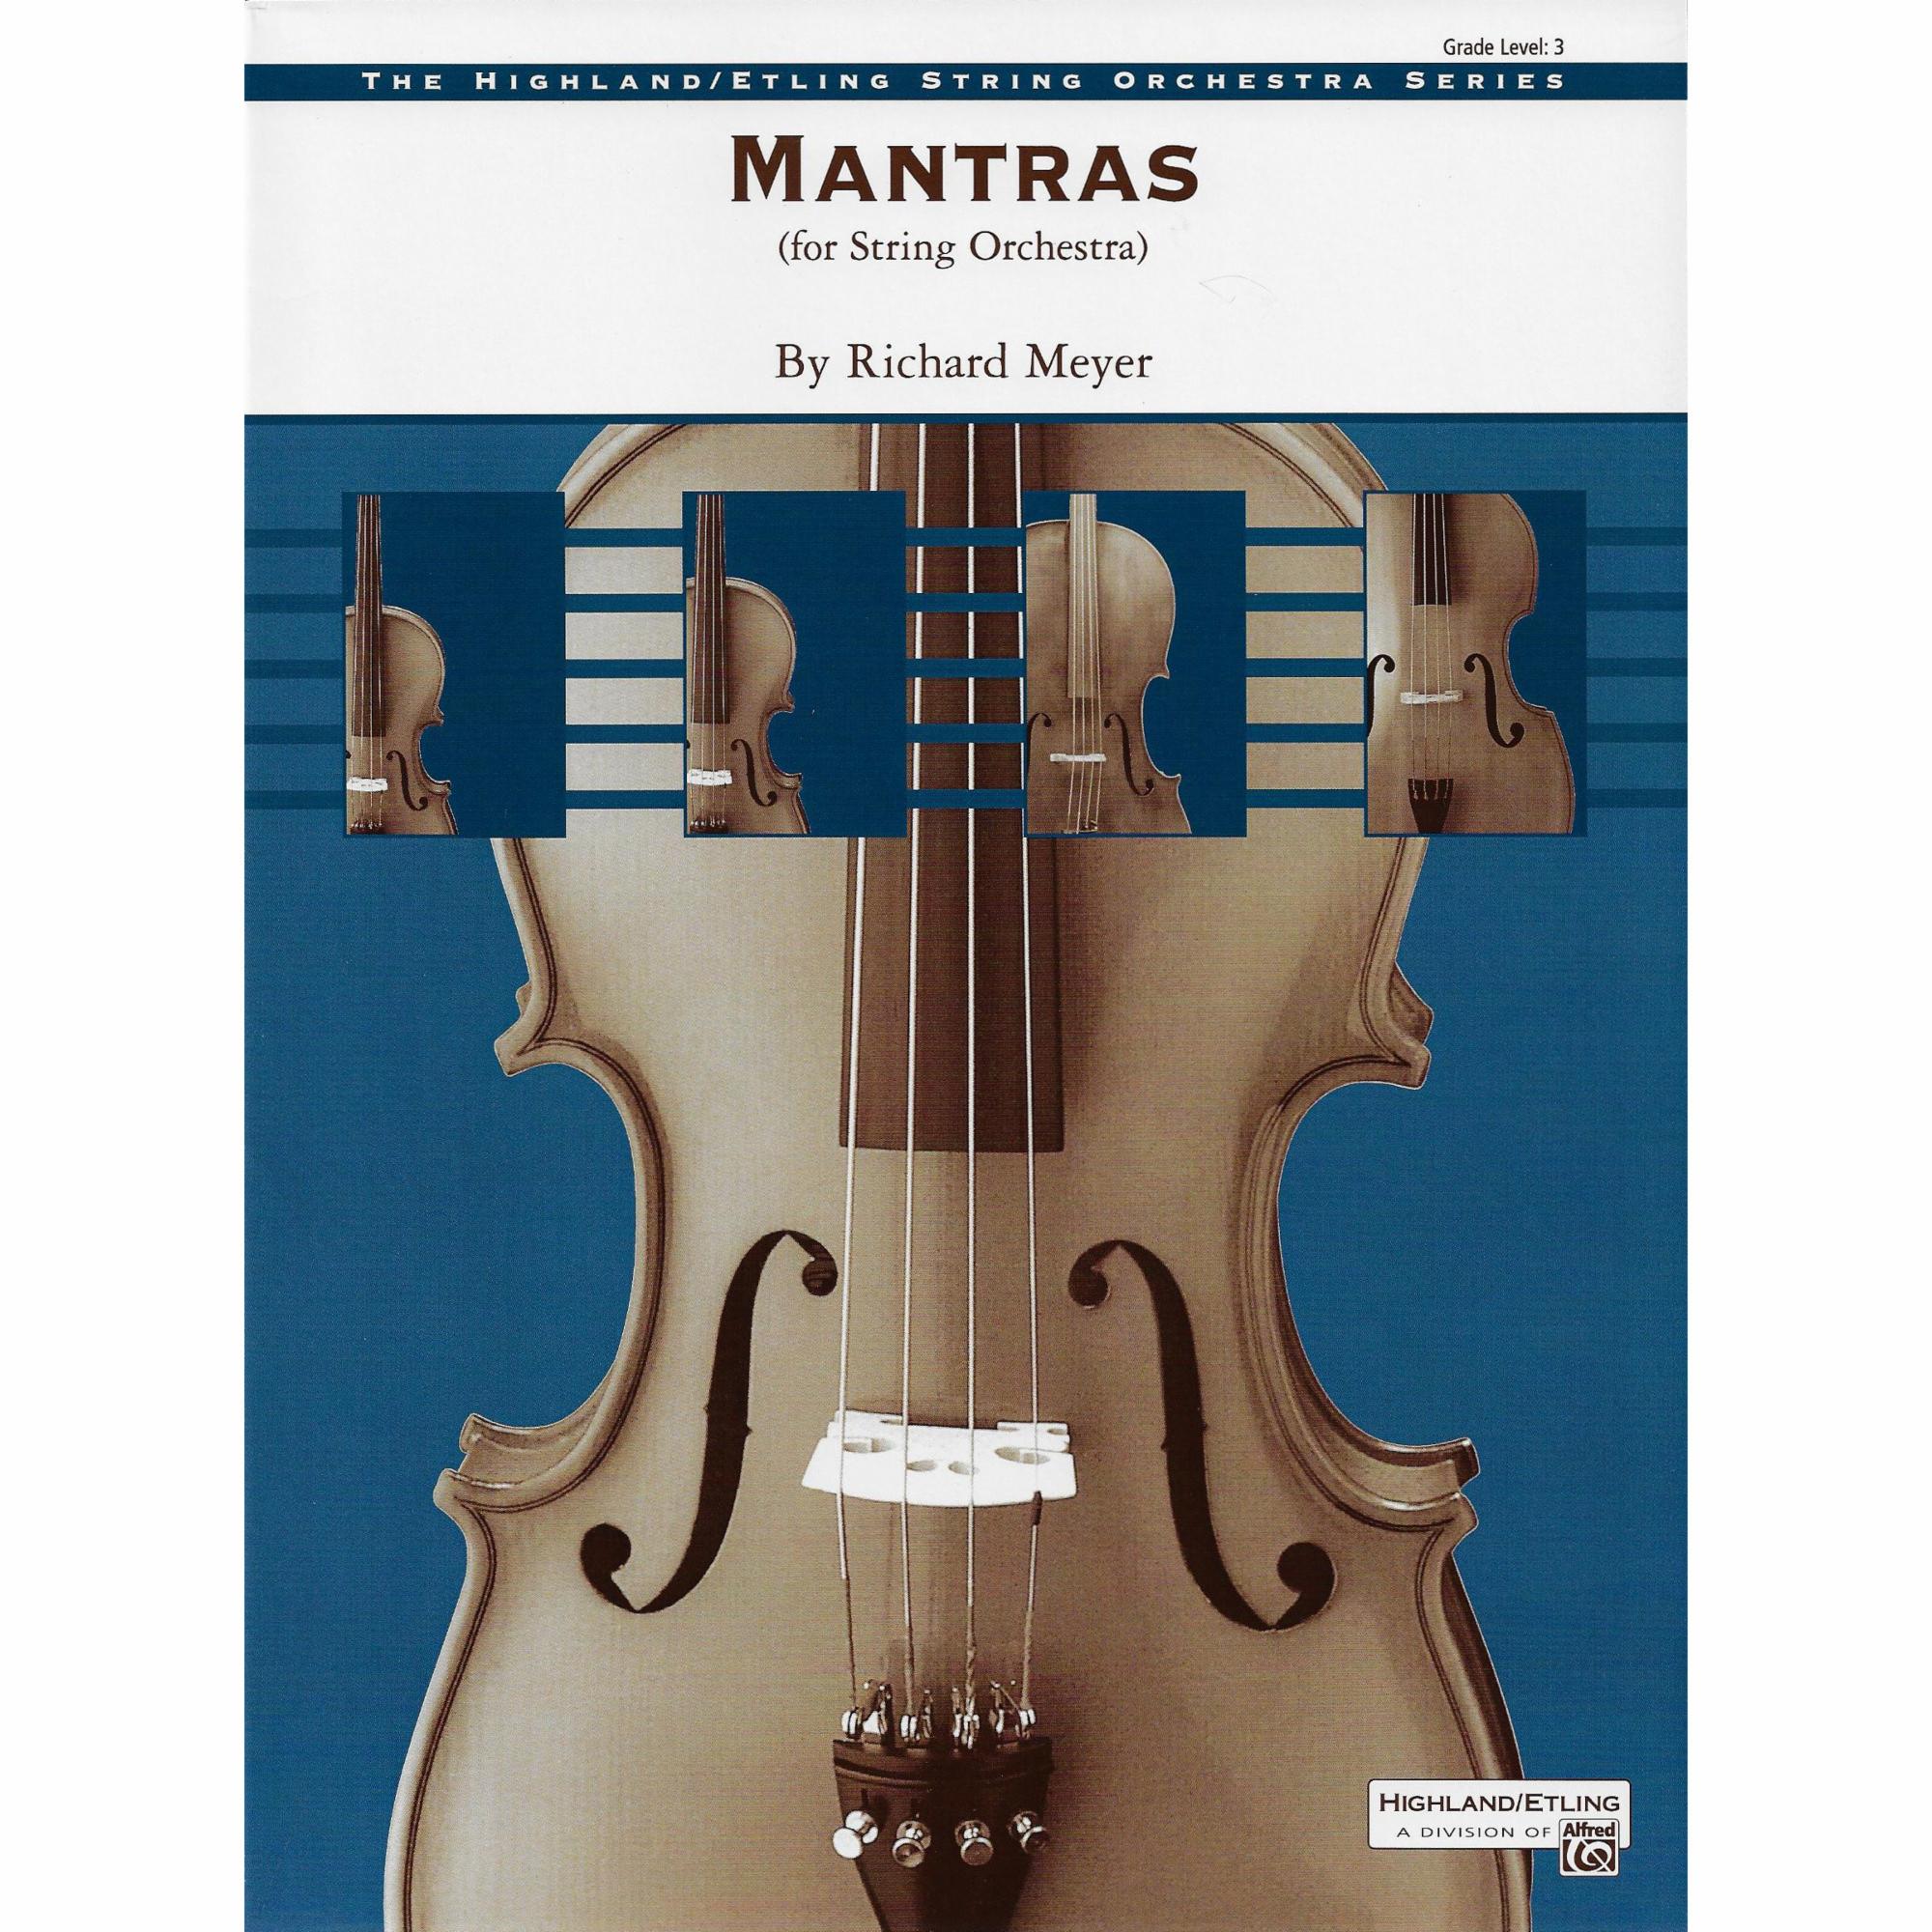 Mantras for String Orchestra